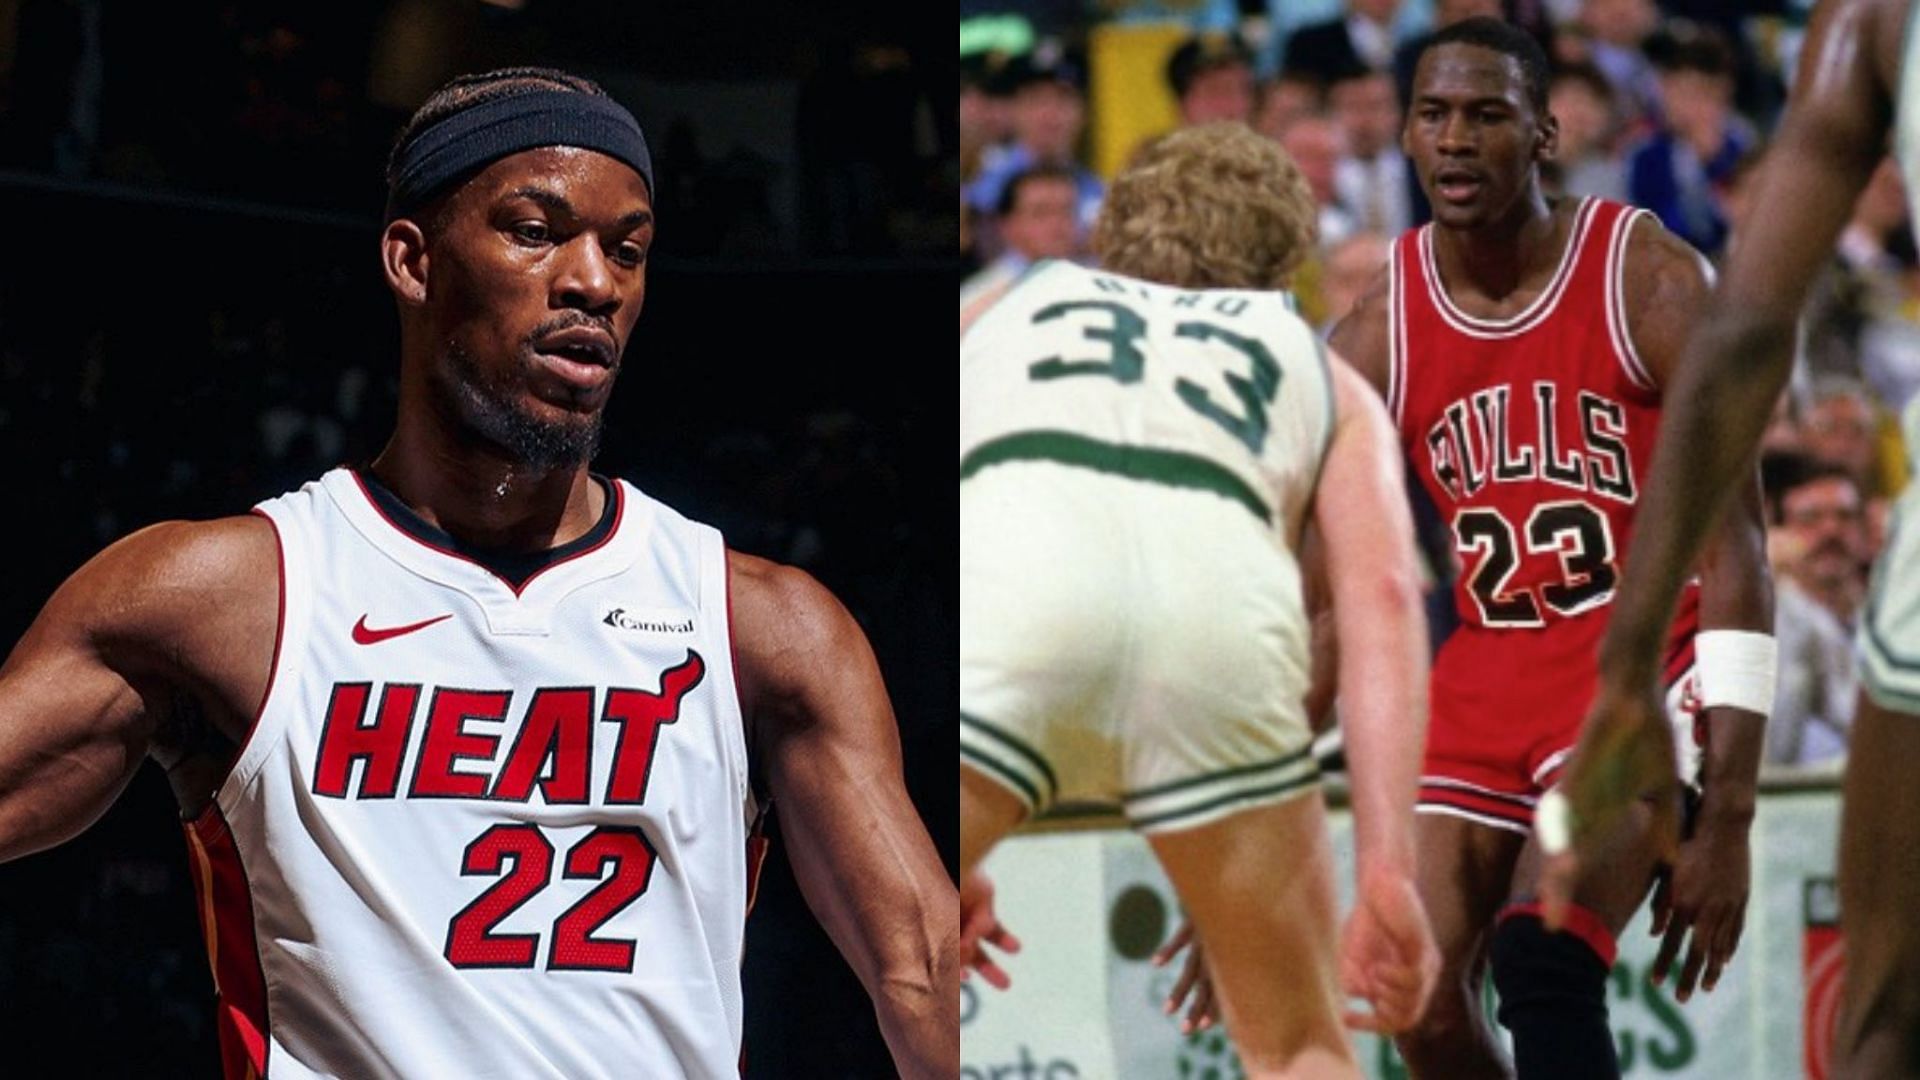 Jimmy Butler and Michael Jordan have two of the highest-scoring games in NBA Playoff history